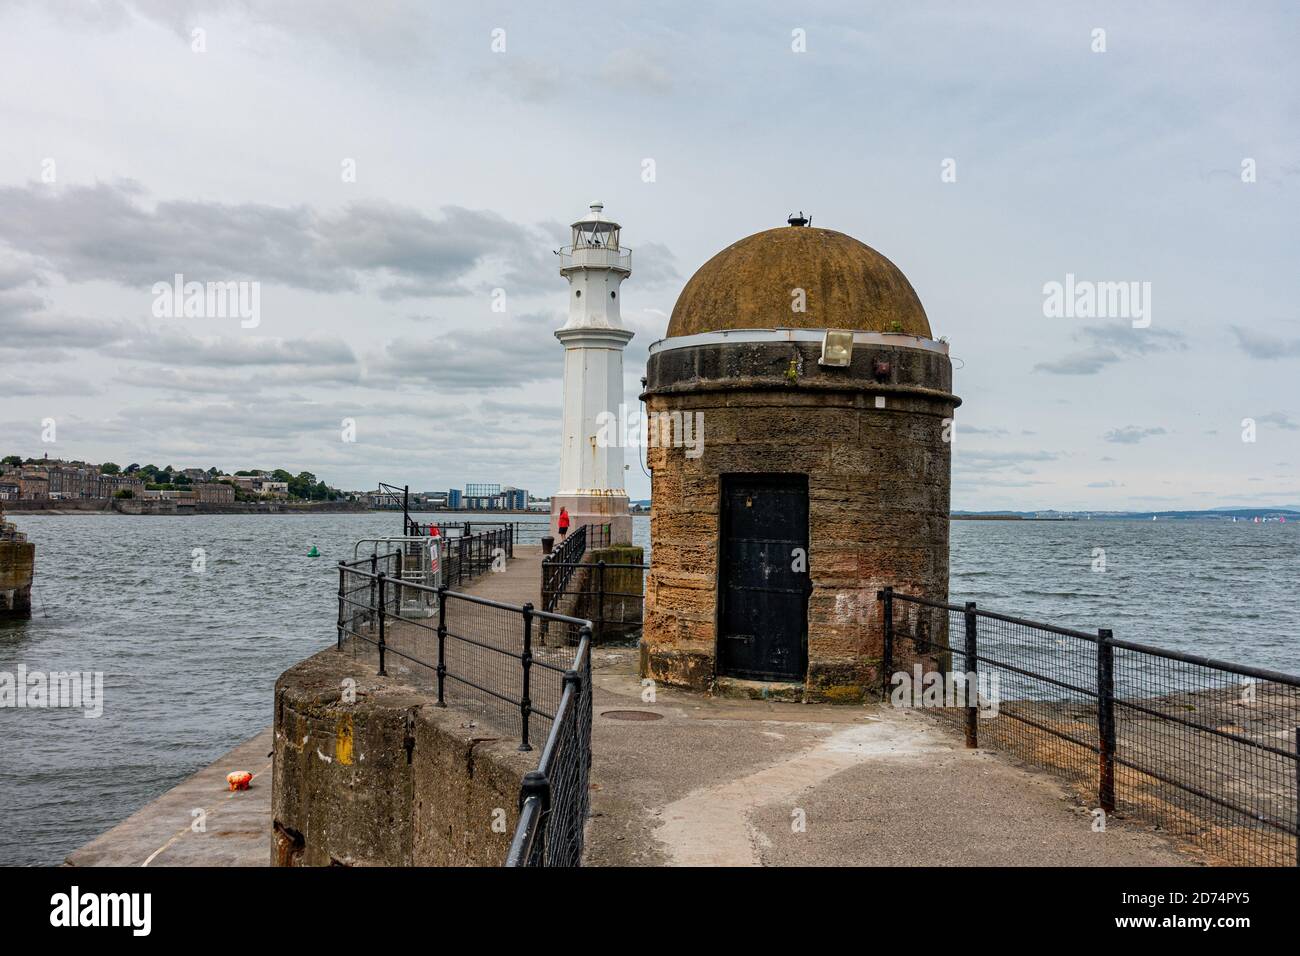 Edinburgh Leith Newhaven lighthouse built in 1869 and located in Edinburgh Scotland Stock Photo